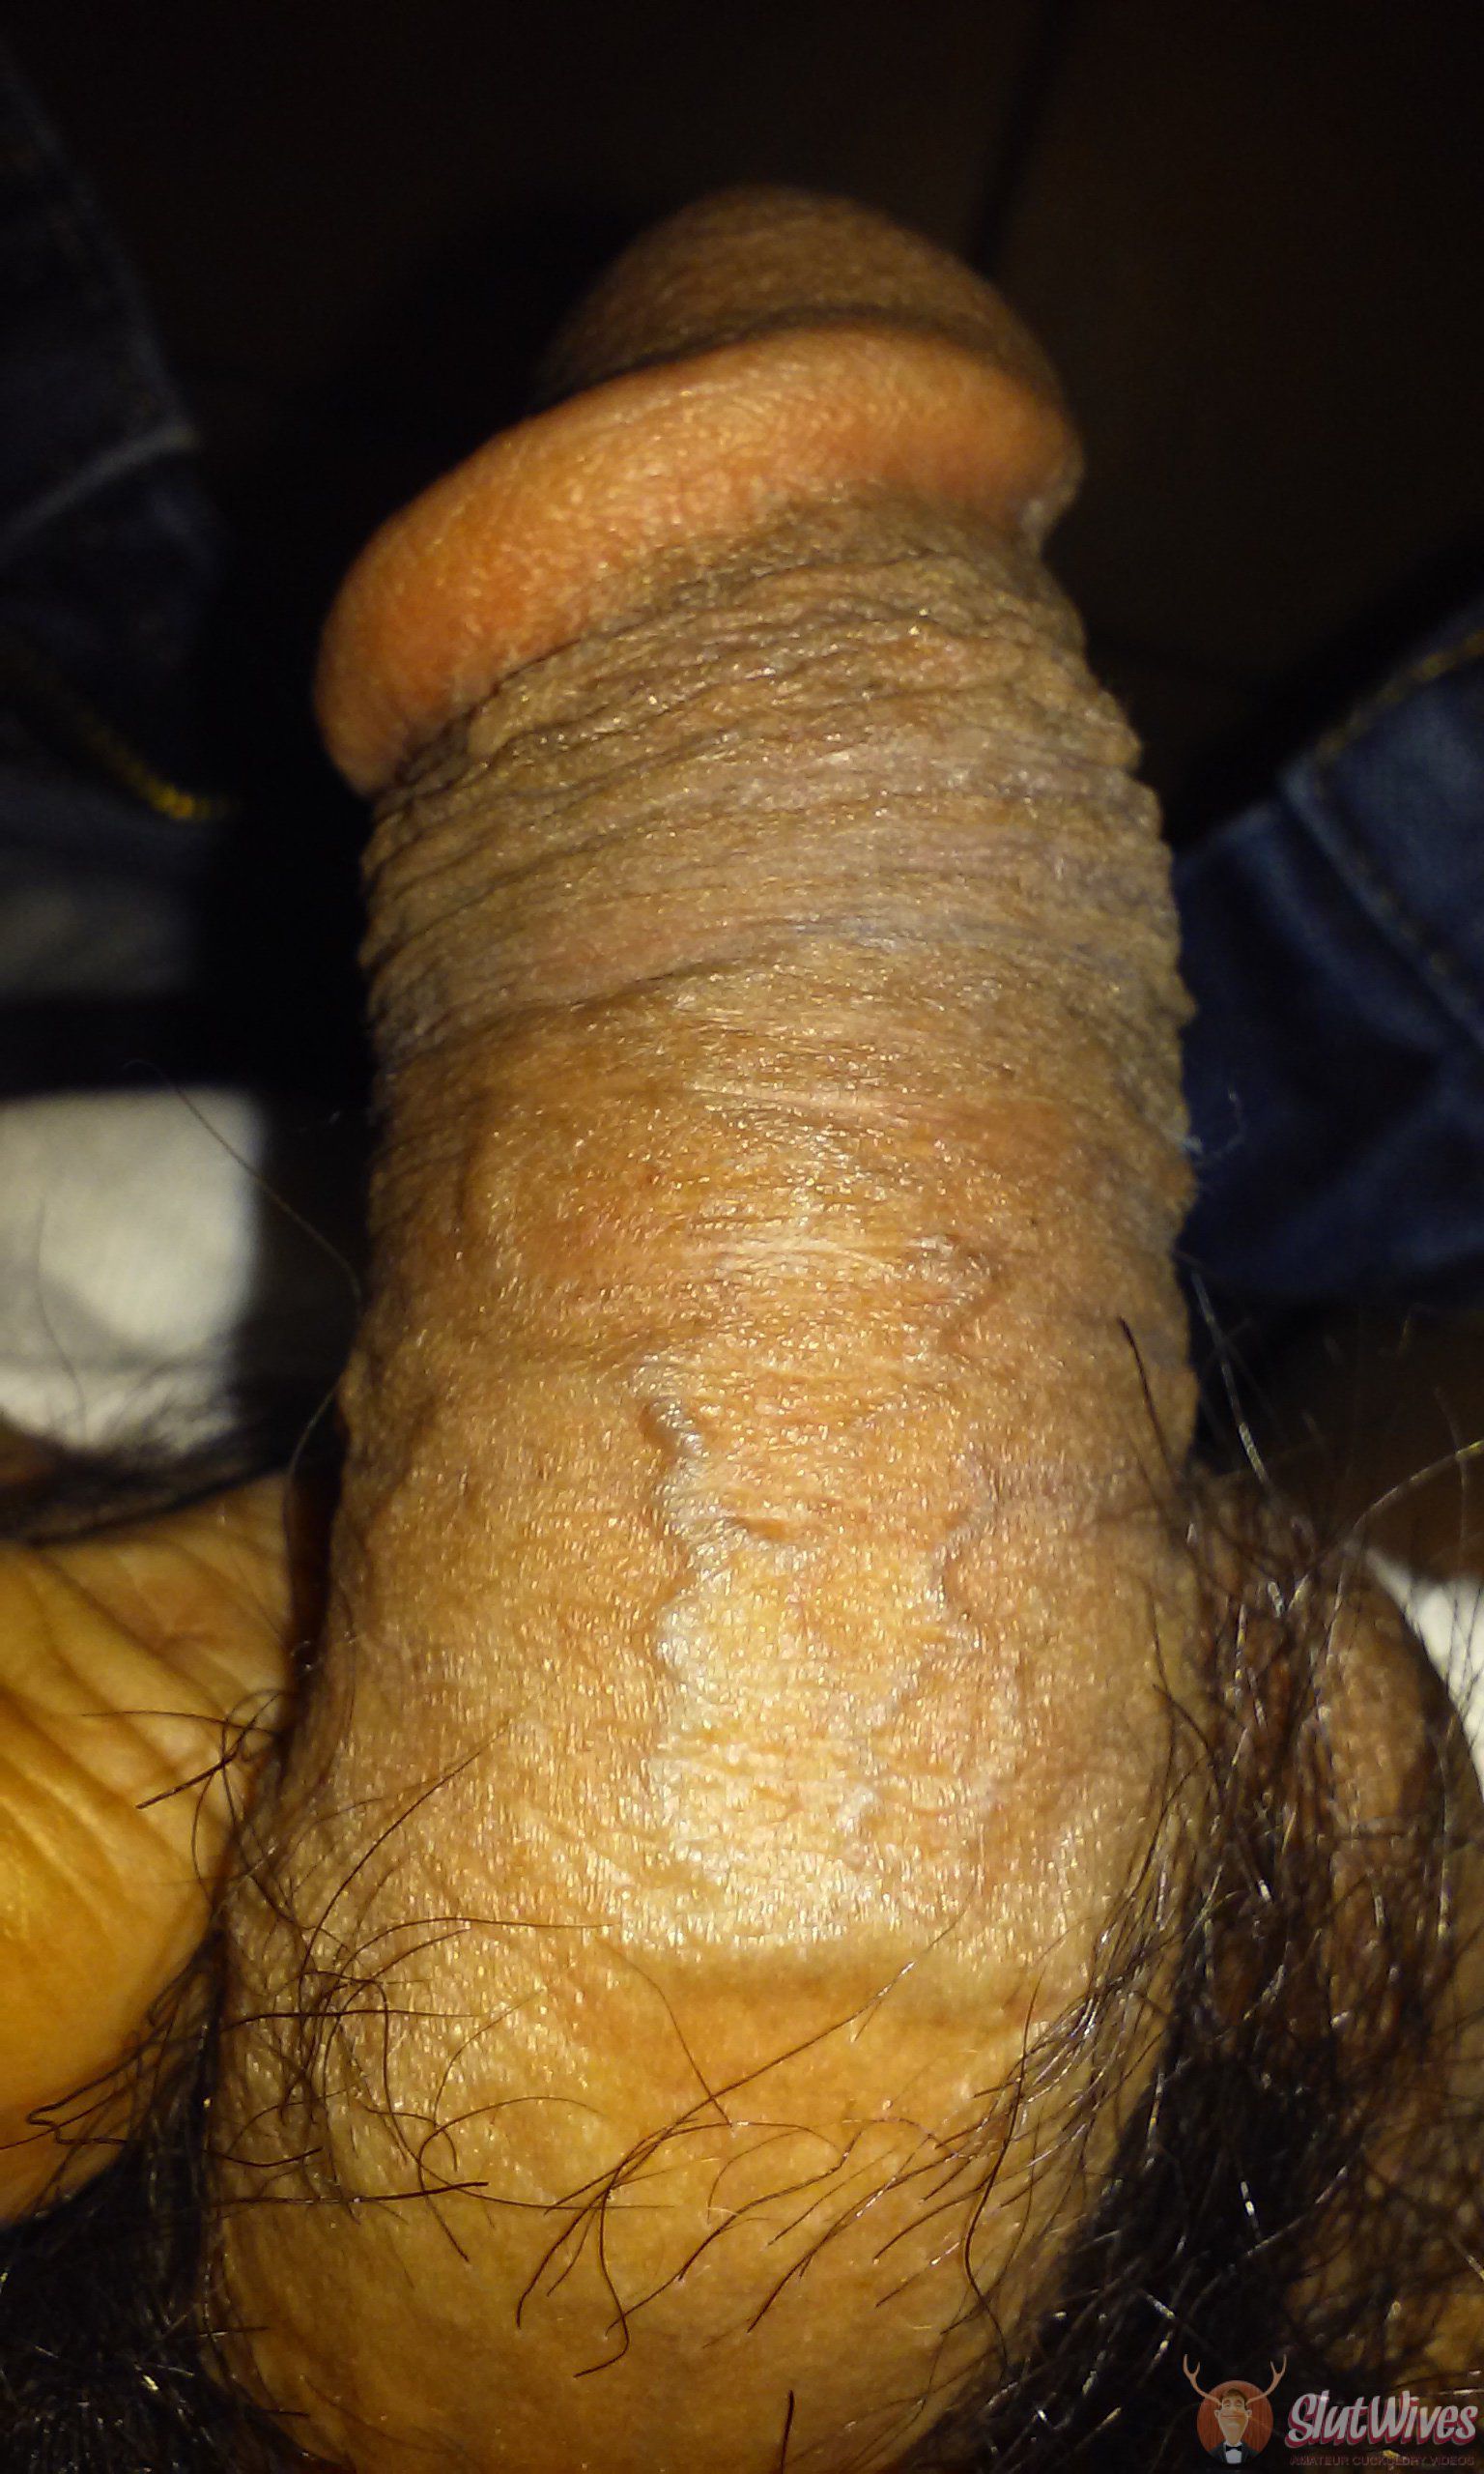 Who want this cock